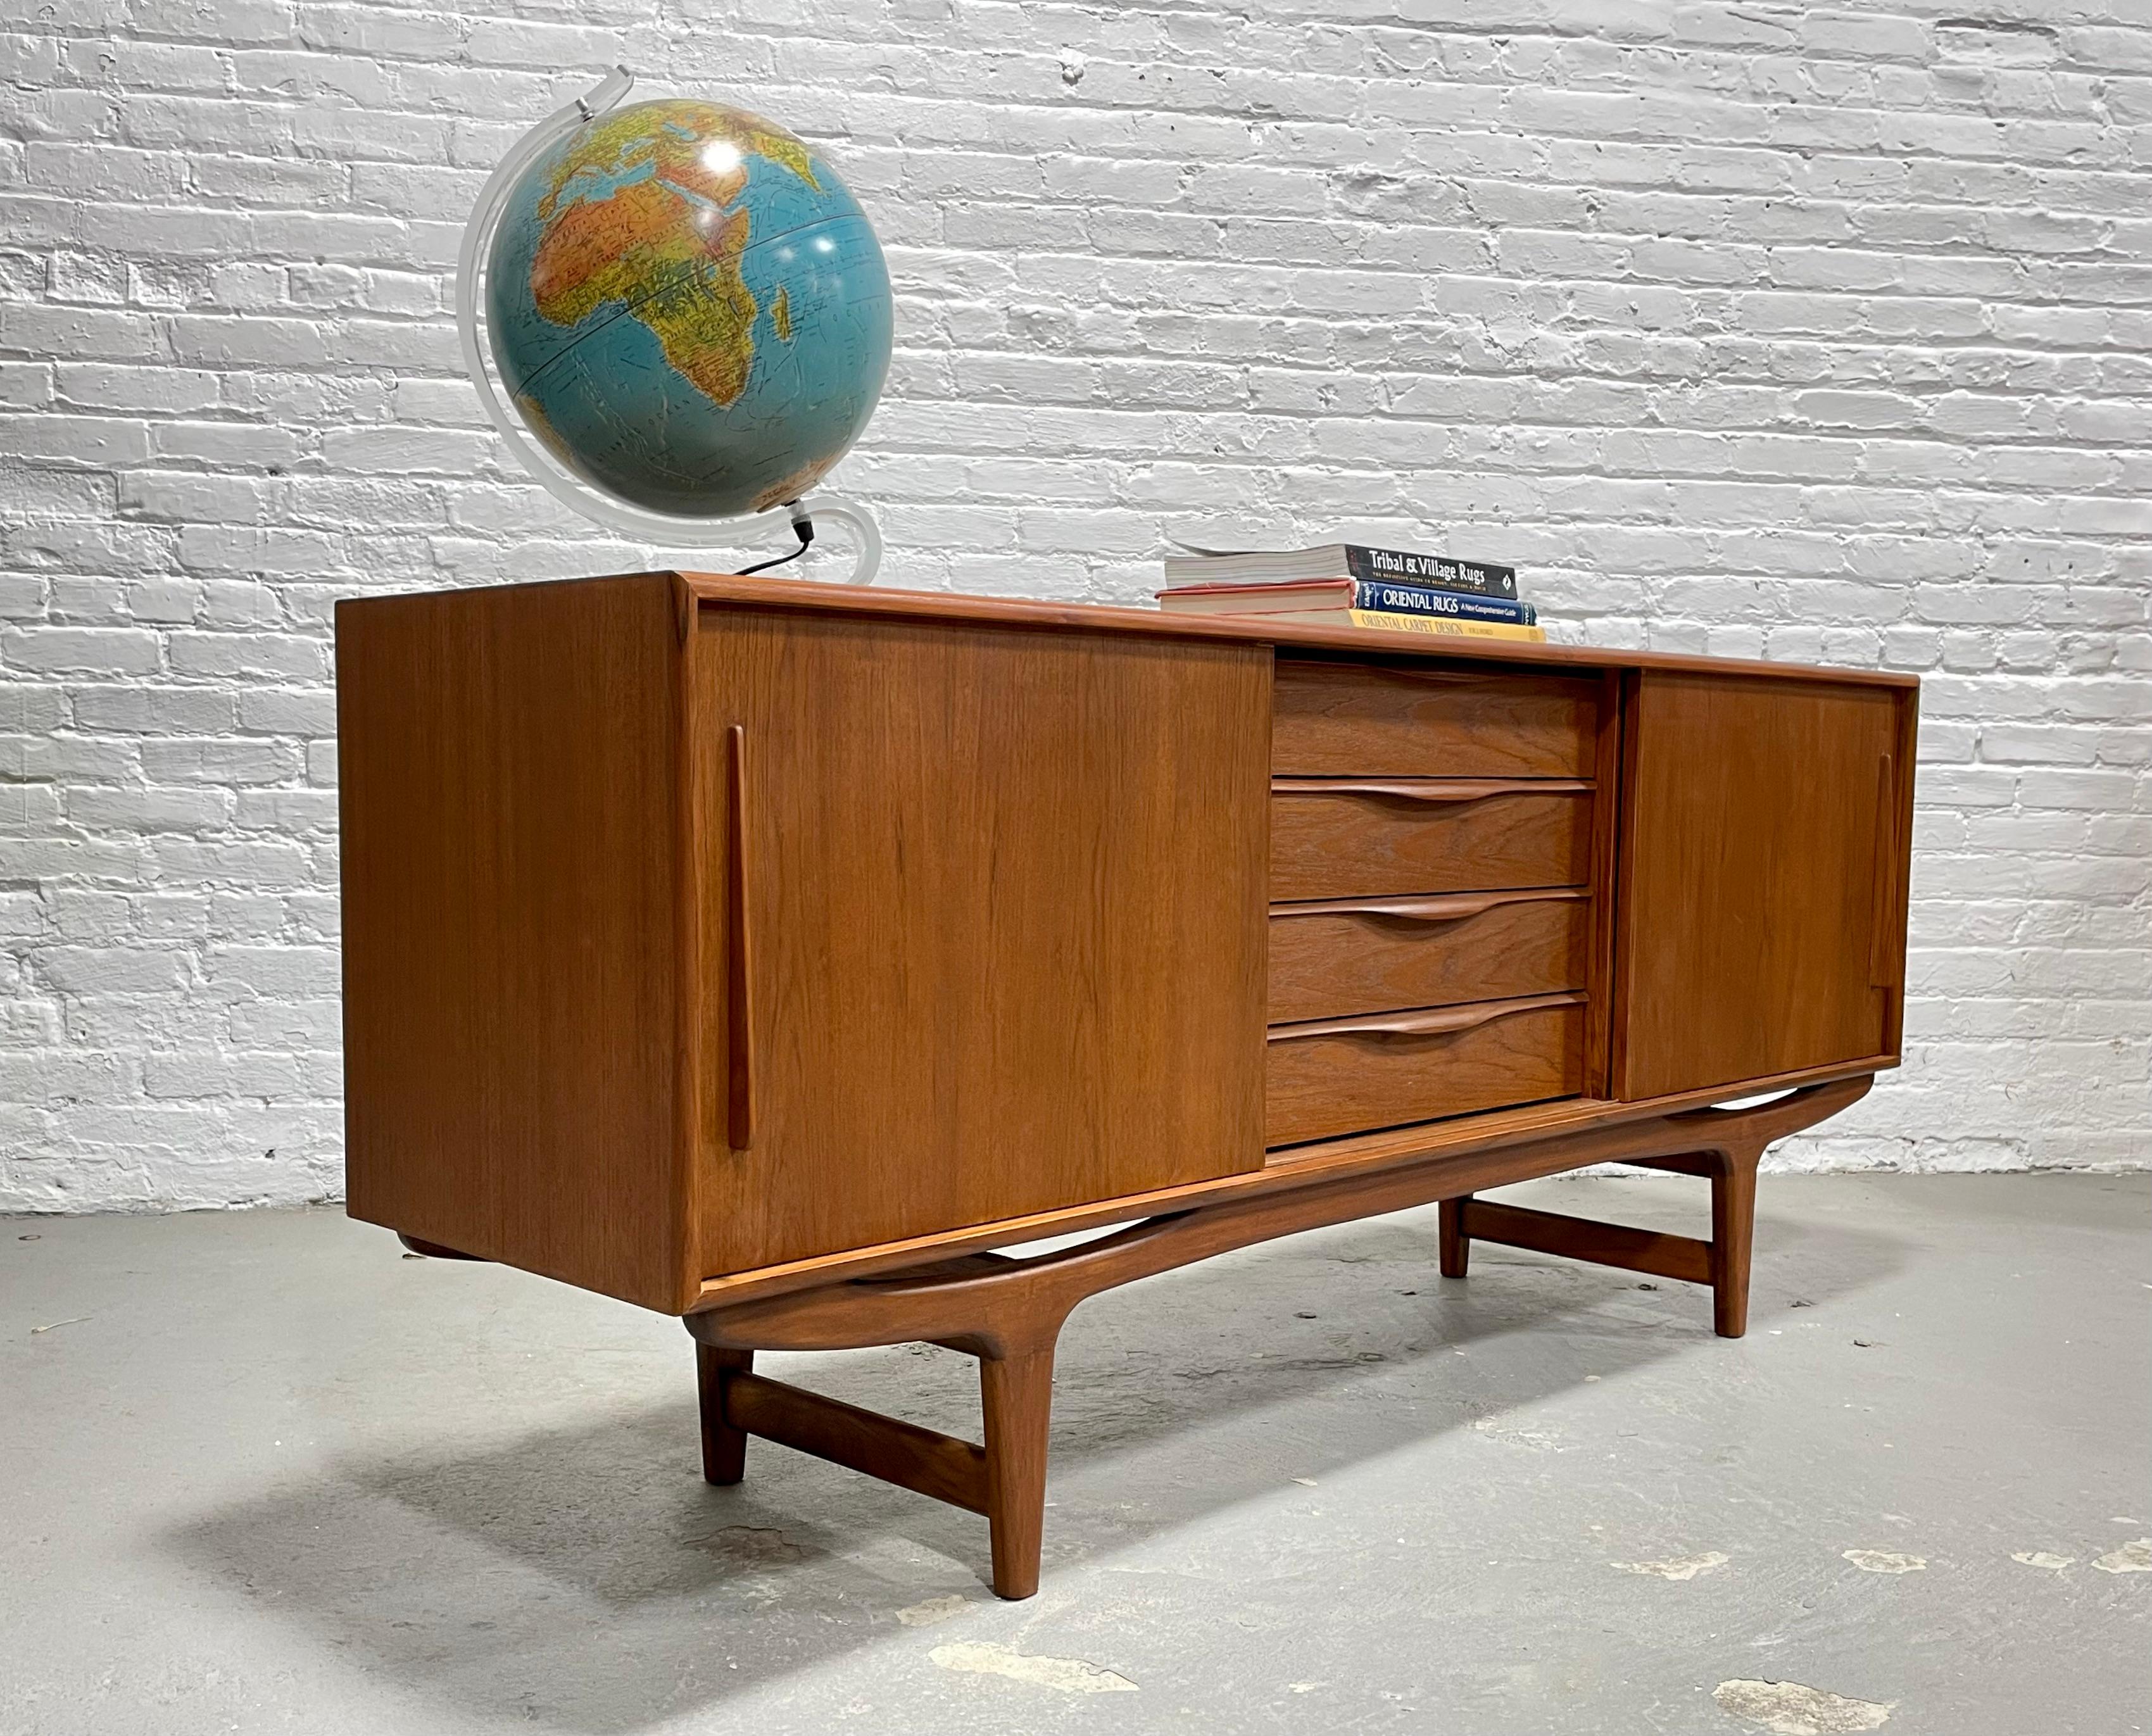 Long sculpted Mid-Century Modern styled credenza / media stand featuring sculptural hand pulls and leg design. Excellent layout for a media stand - generous shelving for components paired with streamlined drawers for remotes, dvds and other